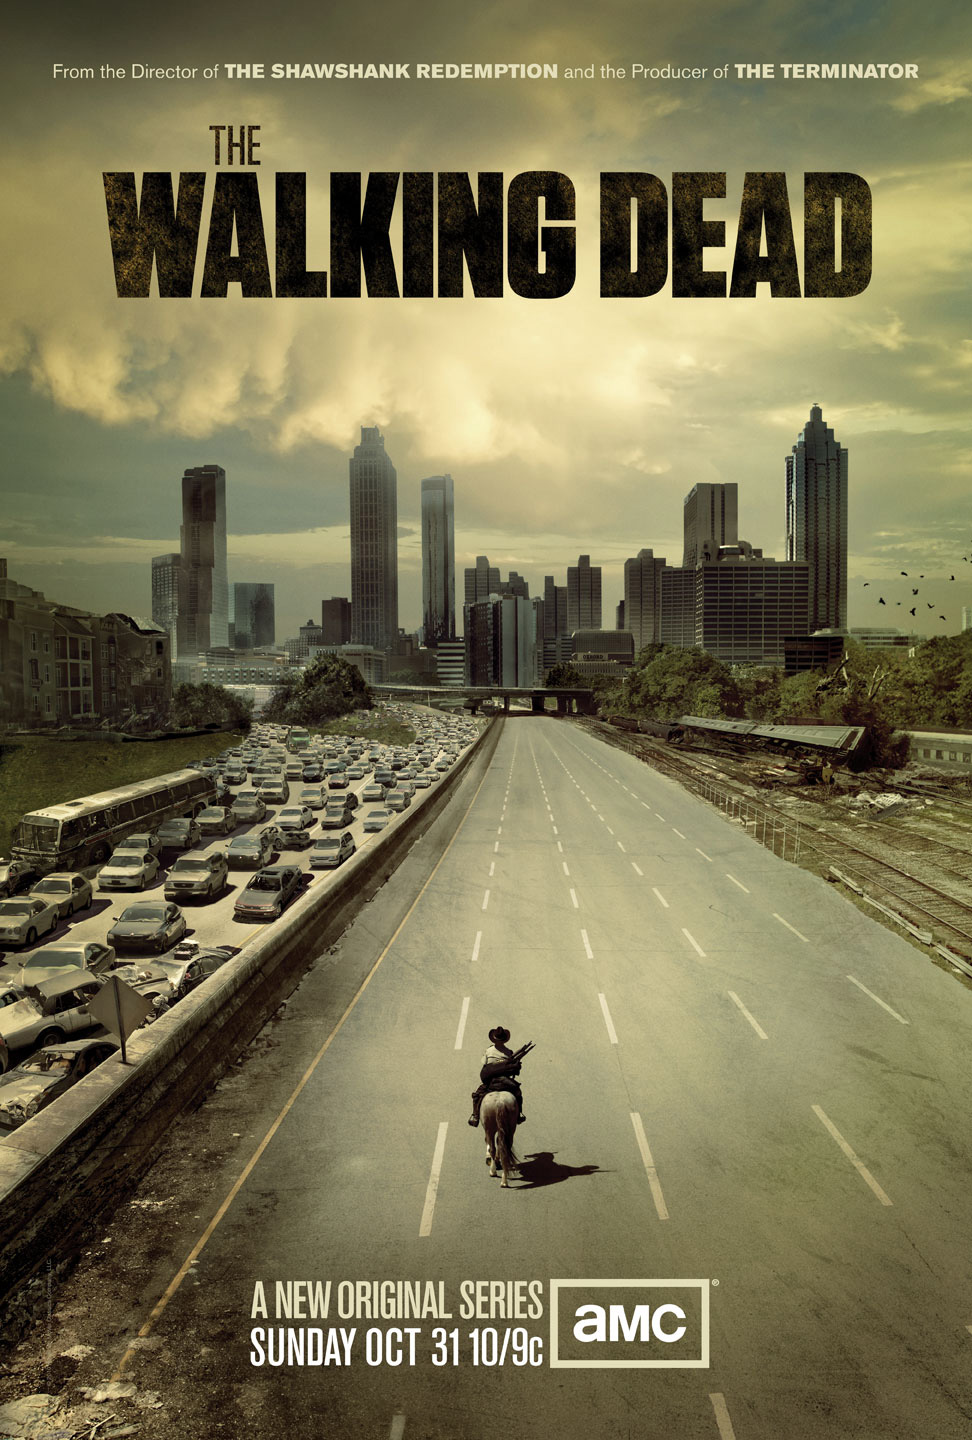 AMC Auditions for "The Walking Dead"